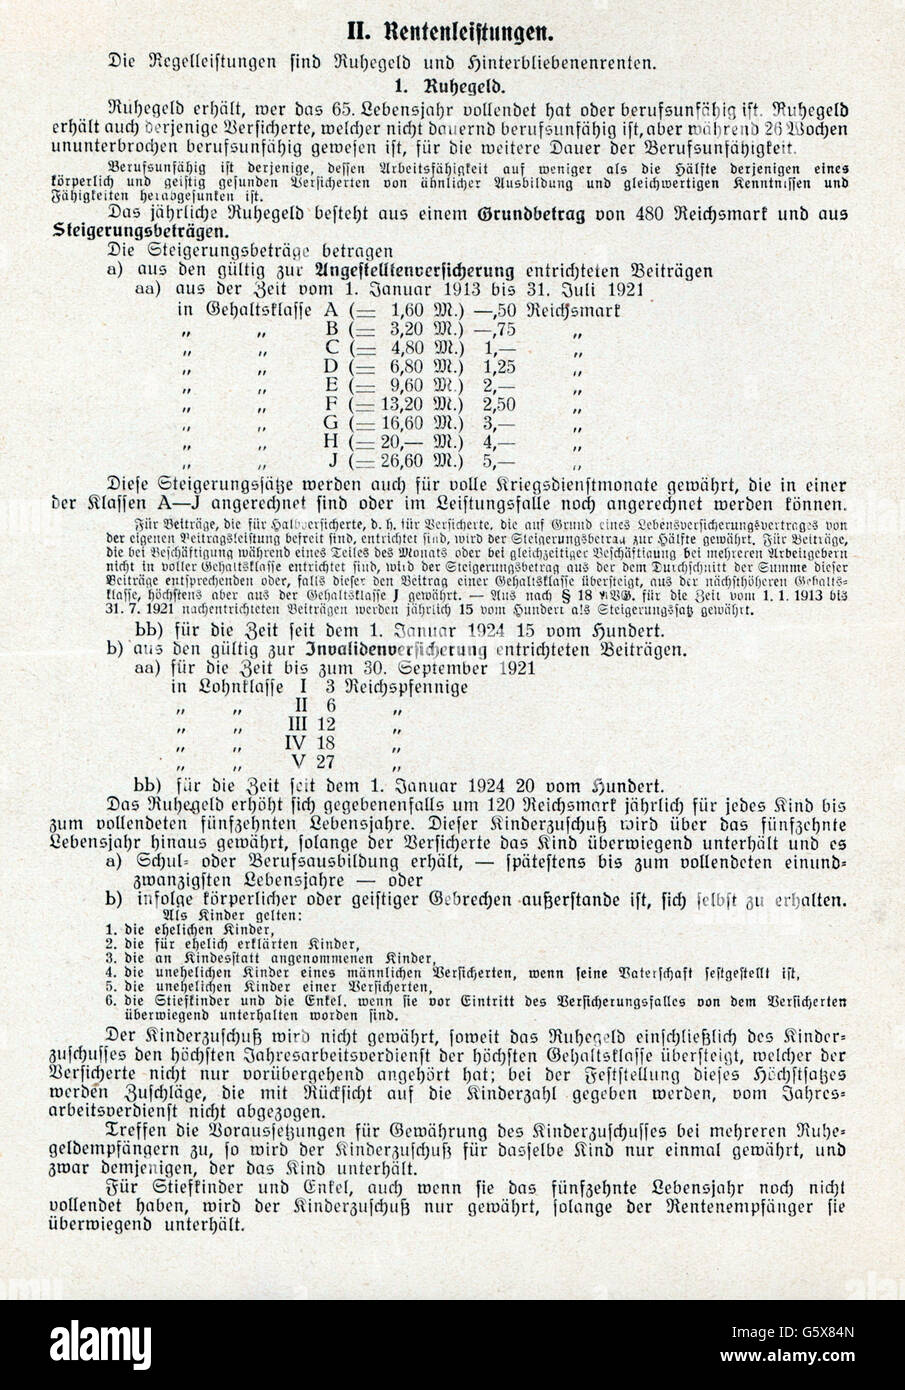 documents,official writing,instructions,instruction number 2,the benefits of the employment insurance,Reich insurance institution for employees,November 1928,page 2,insurances,social security,social insurance,social contribution Carrier,pension insurance fund,pension scheme,pension insurance scheme,retirement insurance,Germany,German Reich,Weimar Republic,1920s,20s,20th century,no-people,documents,document,writing,writings,leaflet,pamphlet,instructions,leaflets,pamphlets,number,numbers,attainment,attainments,employees,office,Additional-Rights-Clearences-Not Available Stock Photo